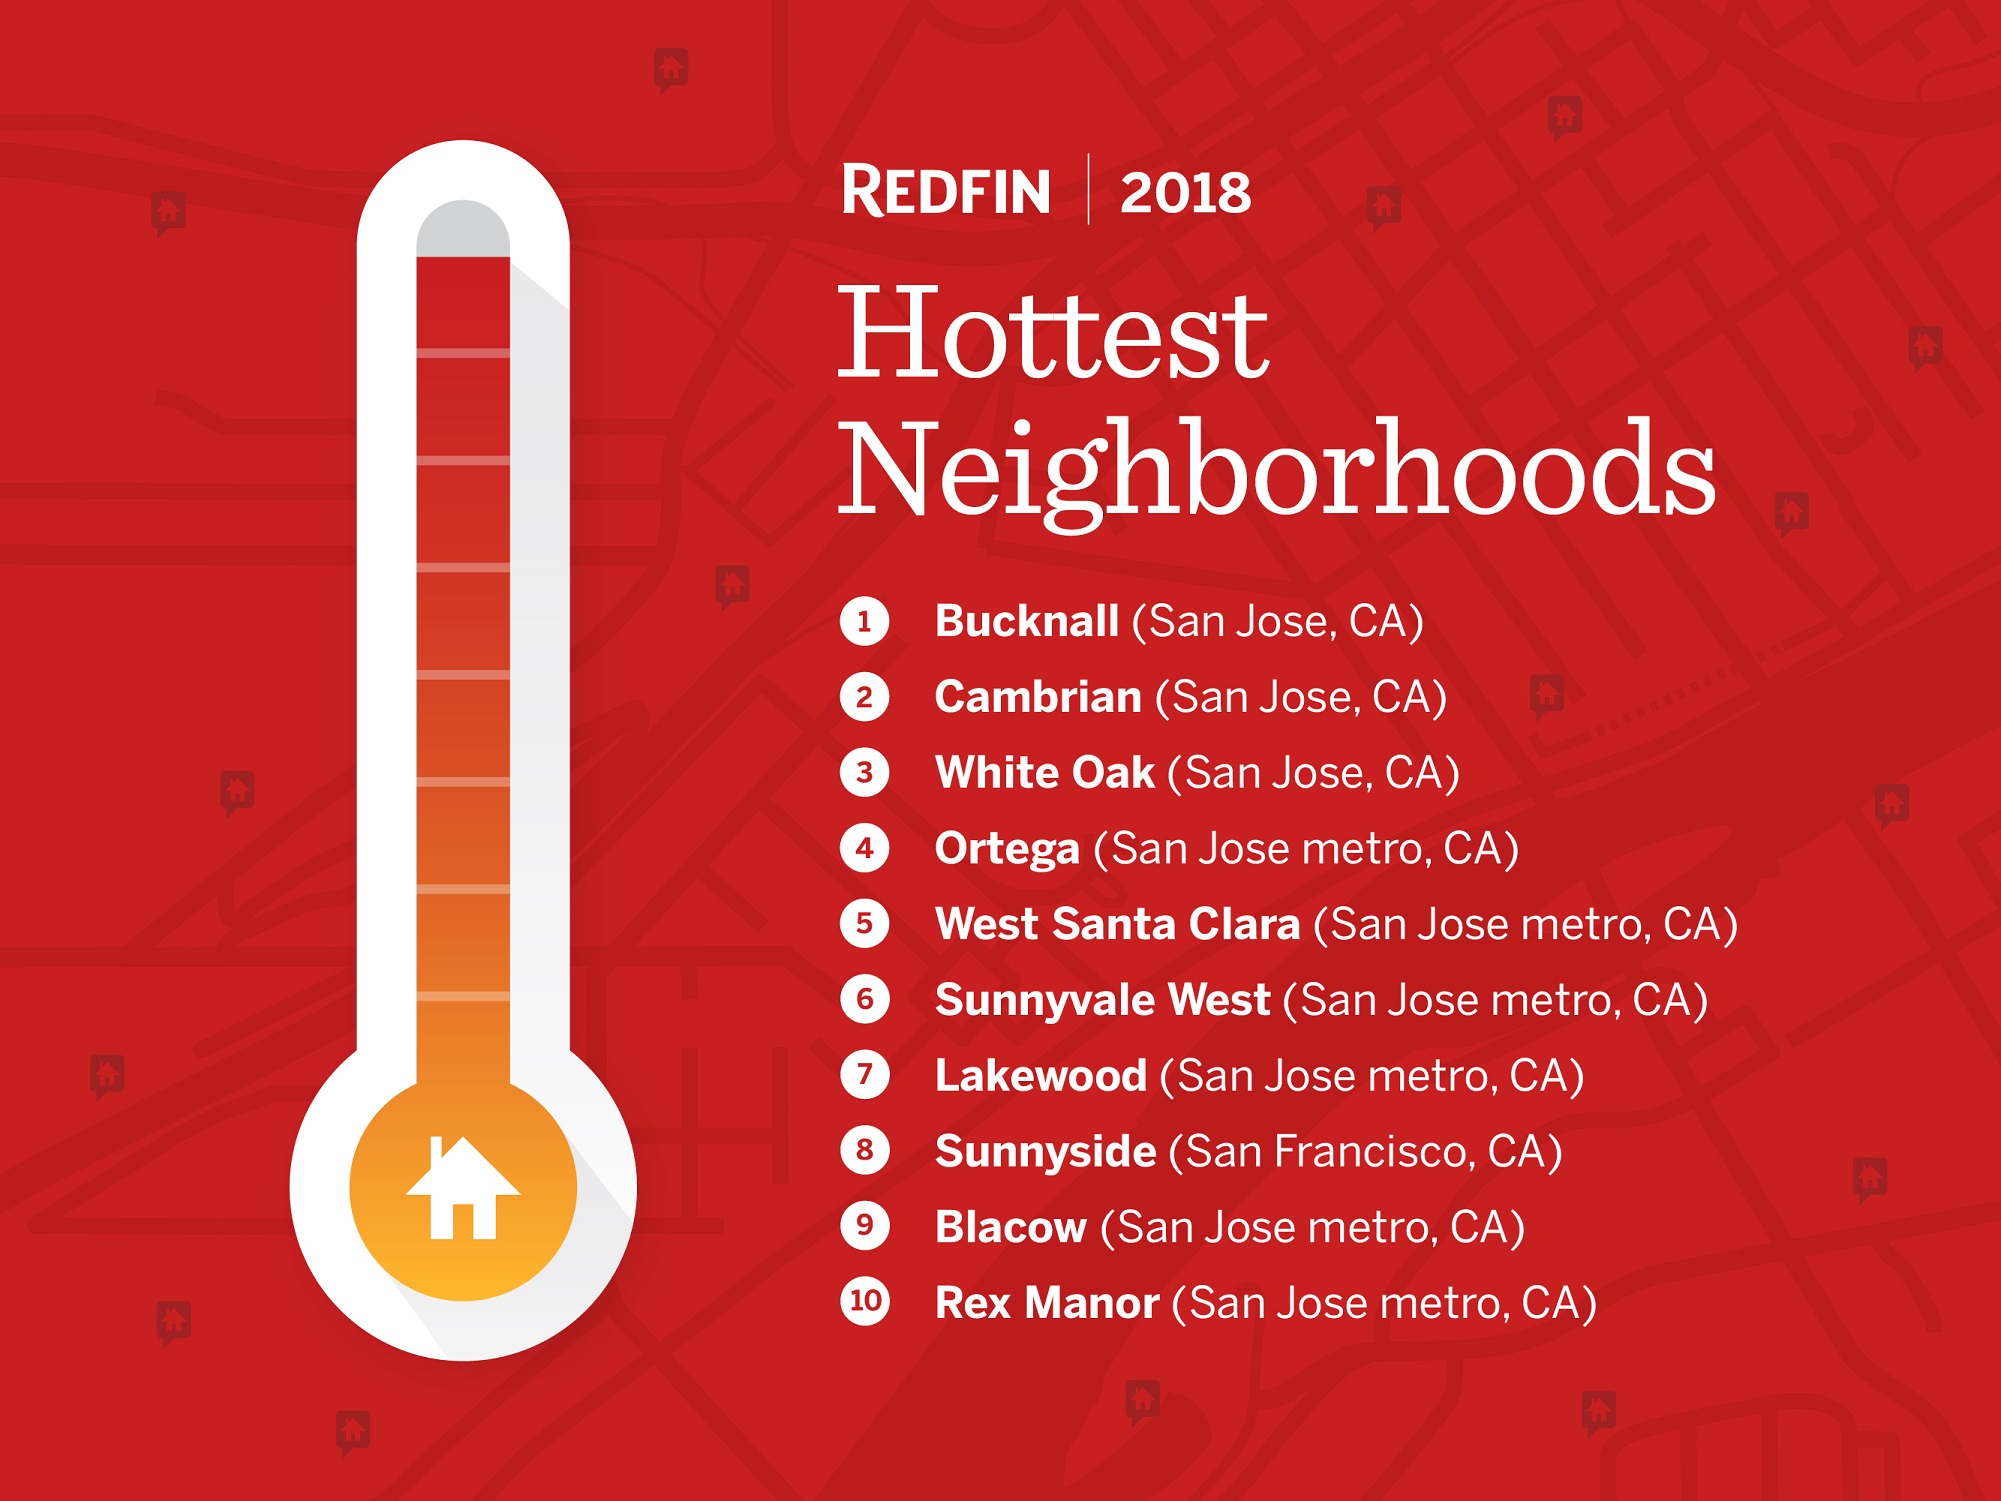 In what might be one of the most lopsided data studies covering the housing market, Redfin’s sixth annual list of the nation’s hottest neighborhoods placed nine of the top 10 locations in the San Jose metro area